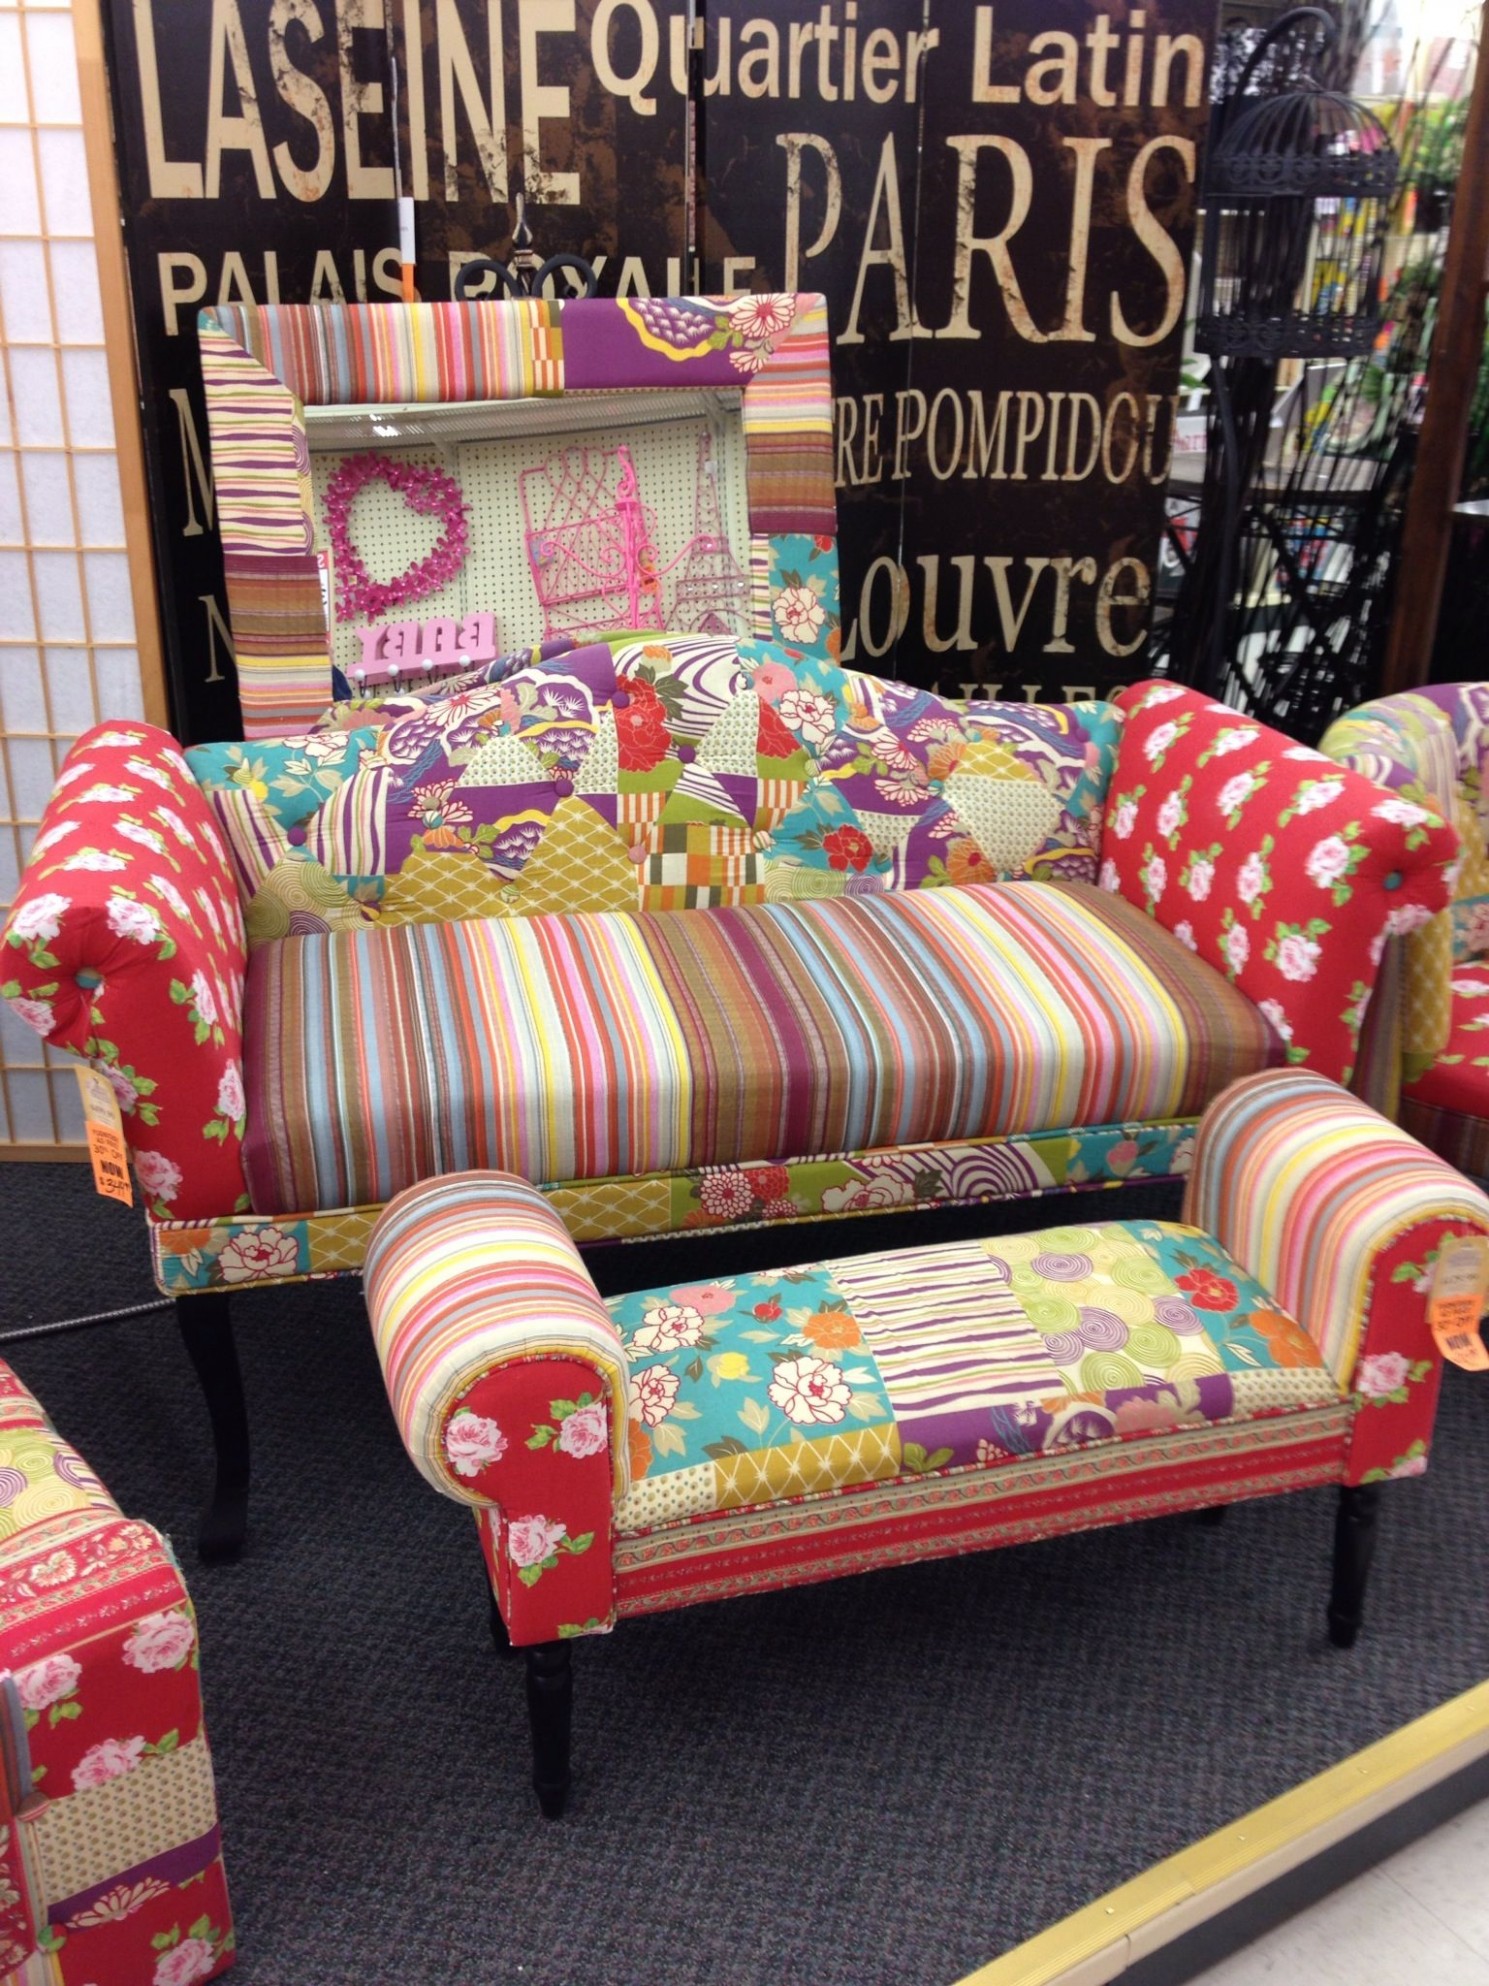 Hobby Lobby In Santa Fe, New Mexico. Colorful Patchwork Sofa And ..